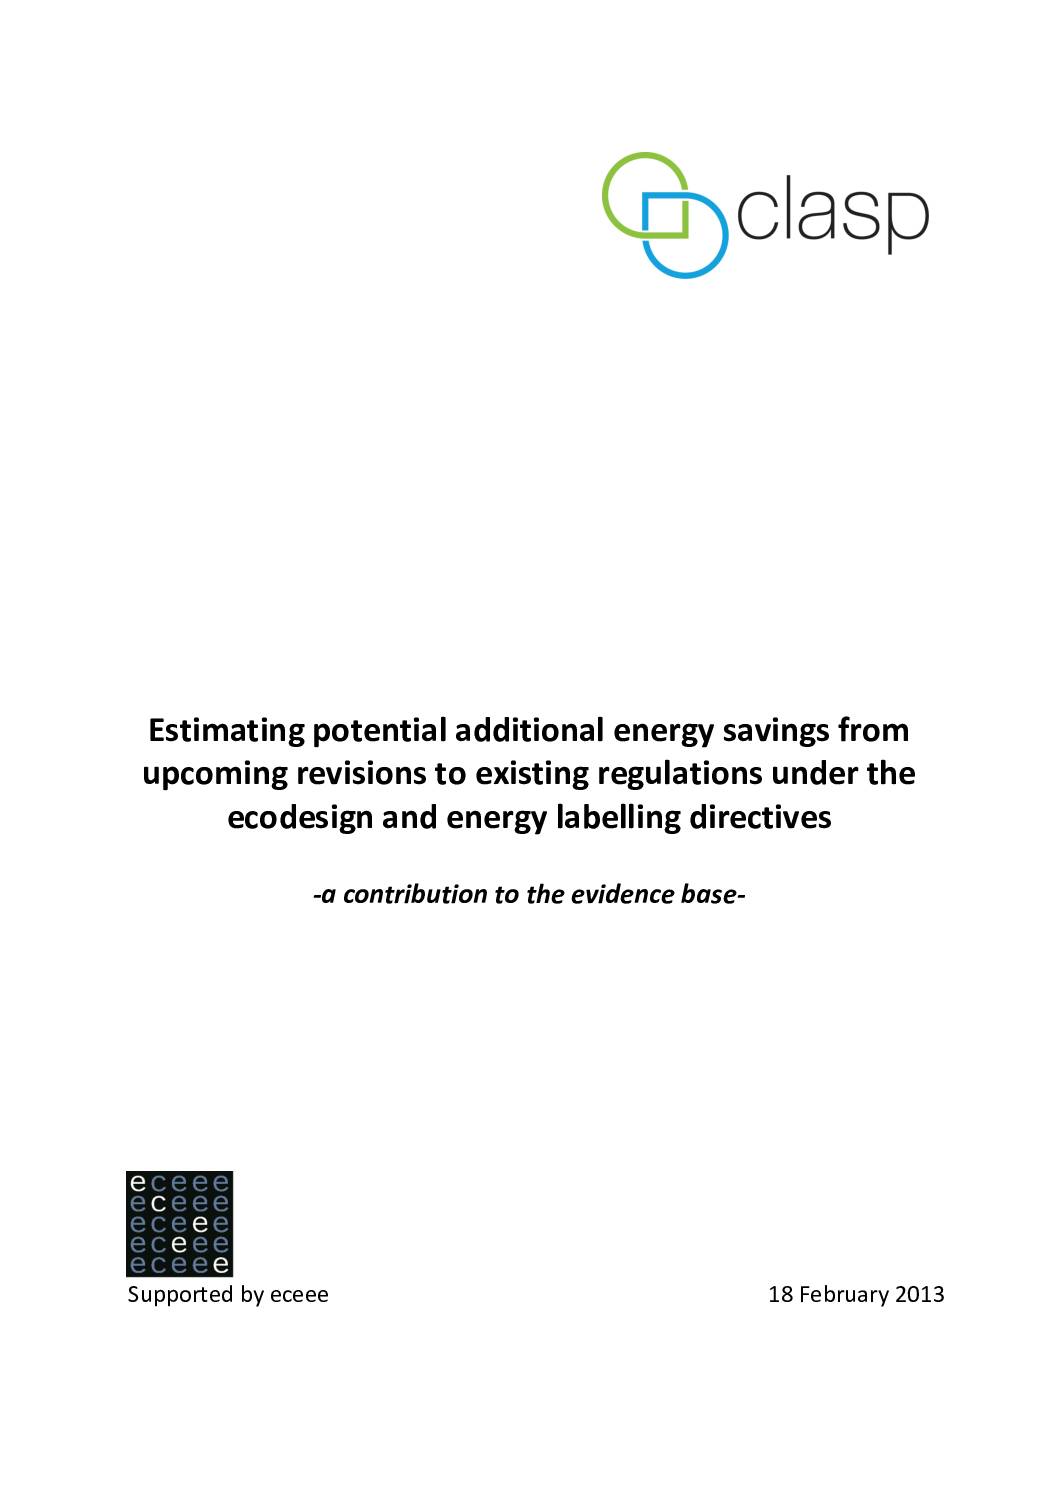 Estimating potential additional energy savings from upcoming revisions to existing regulations under the ecodesign and energy labelling directives